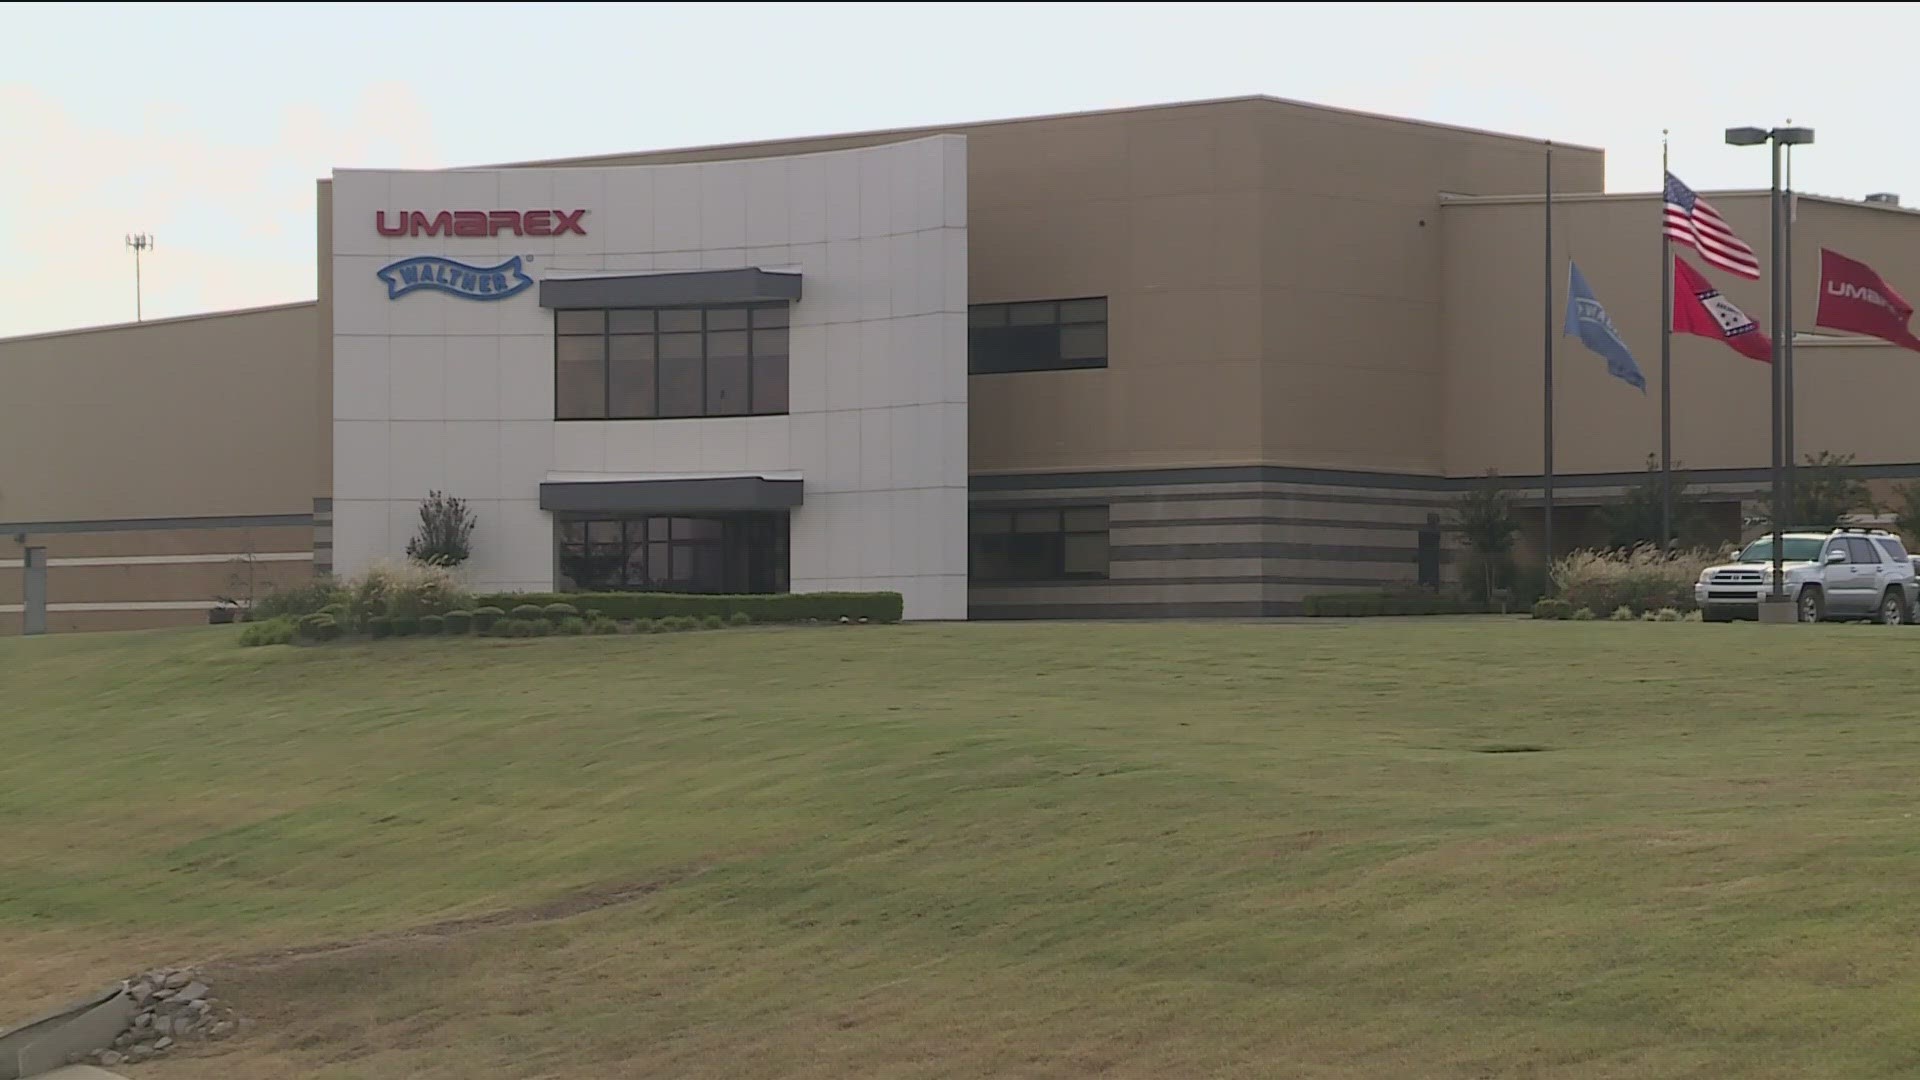 ALL NEW AT 10 – LEADERS IN FORT SMITH UNANIMOUSLY VOTED ON A WAY TO FUND THE EXPANSION OF A PRE-EXISITING PLANT THAT WILL ADD JOBS.